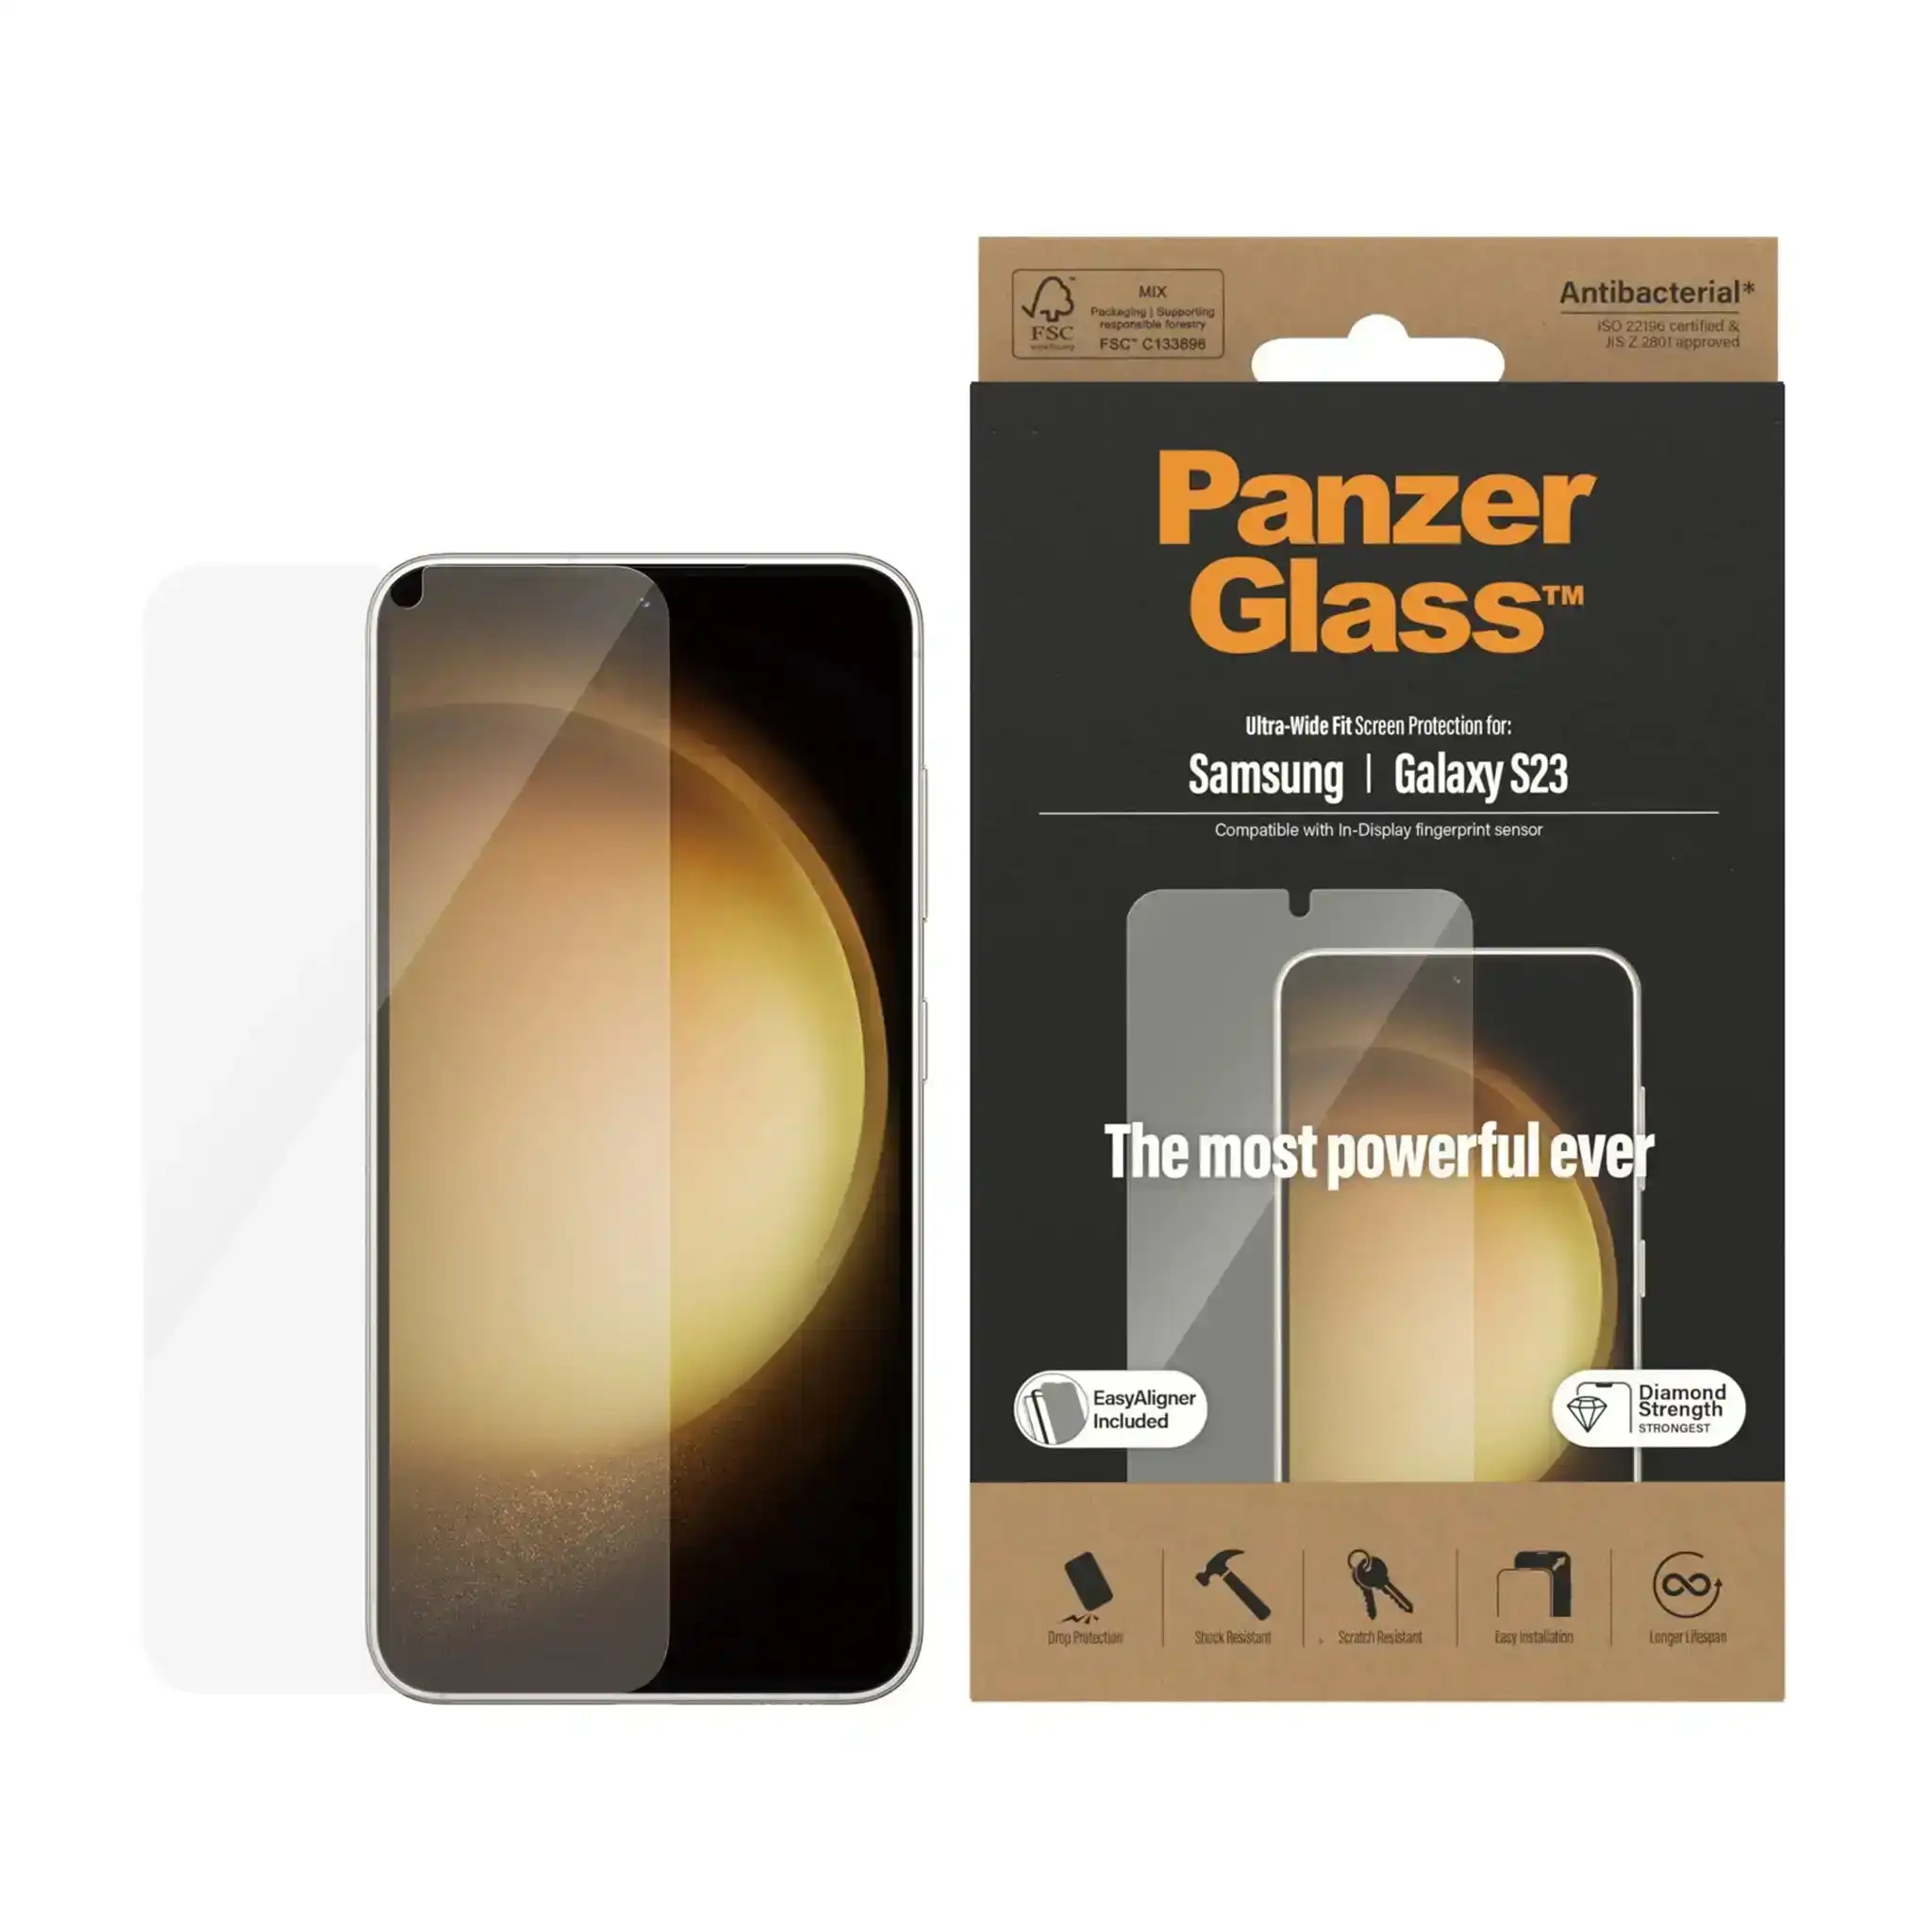 PanzerGlass Ultra-Wide Fit Screen Protector For Samsung Galaxy S23